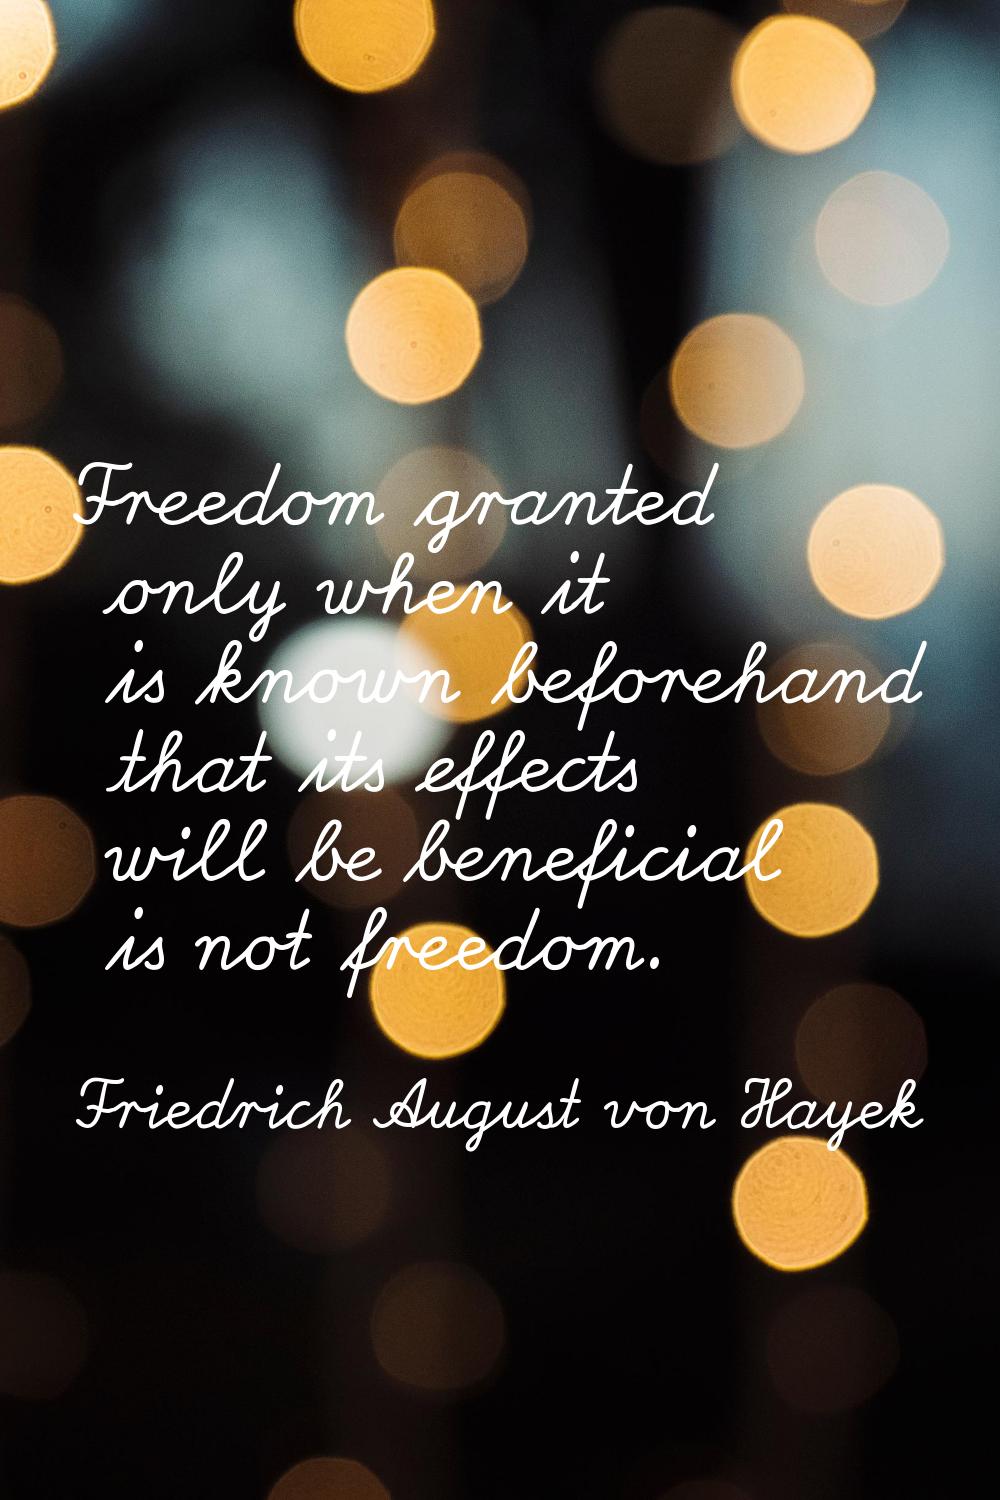 Freedom granted only when it is known beforehand that its effects will be beneficial is not freedom